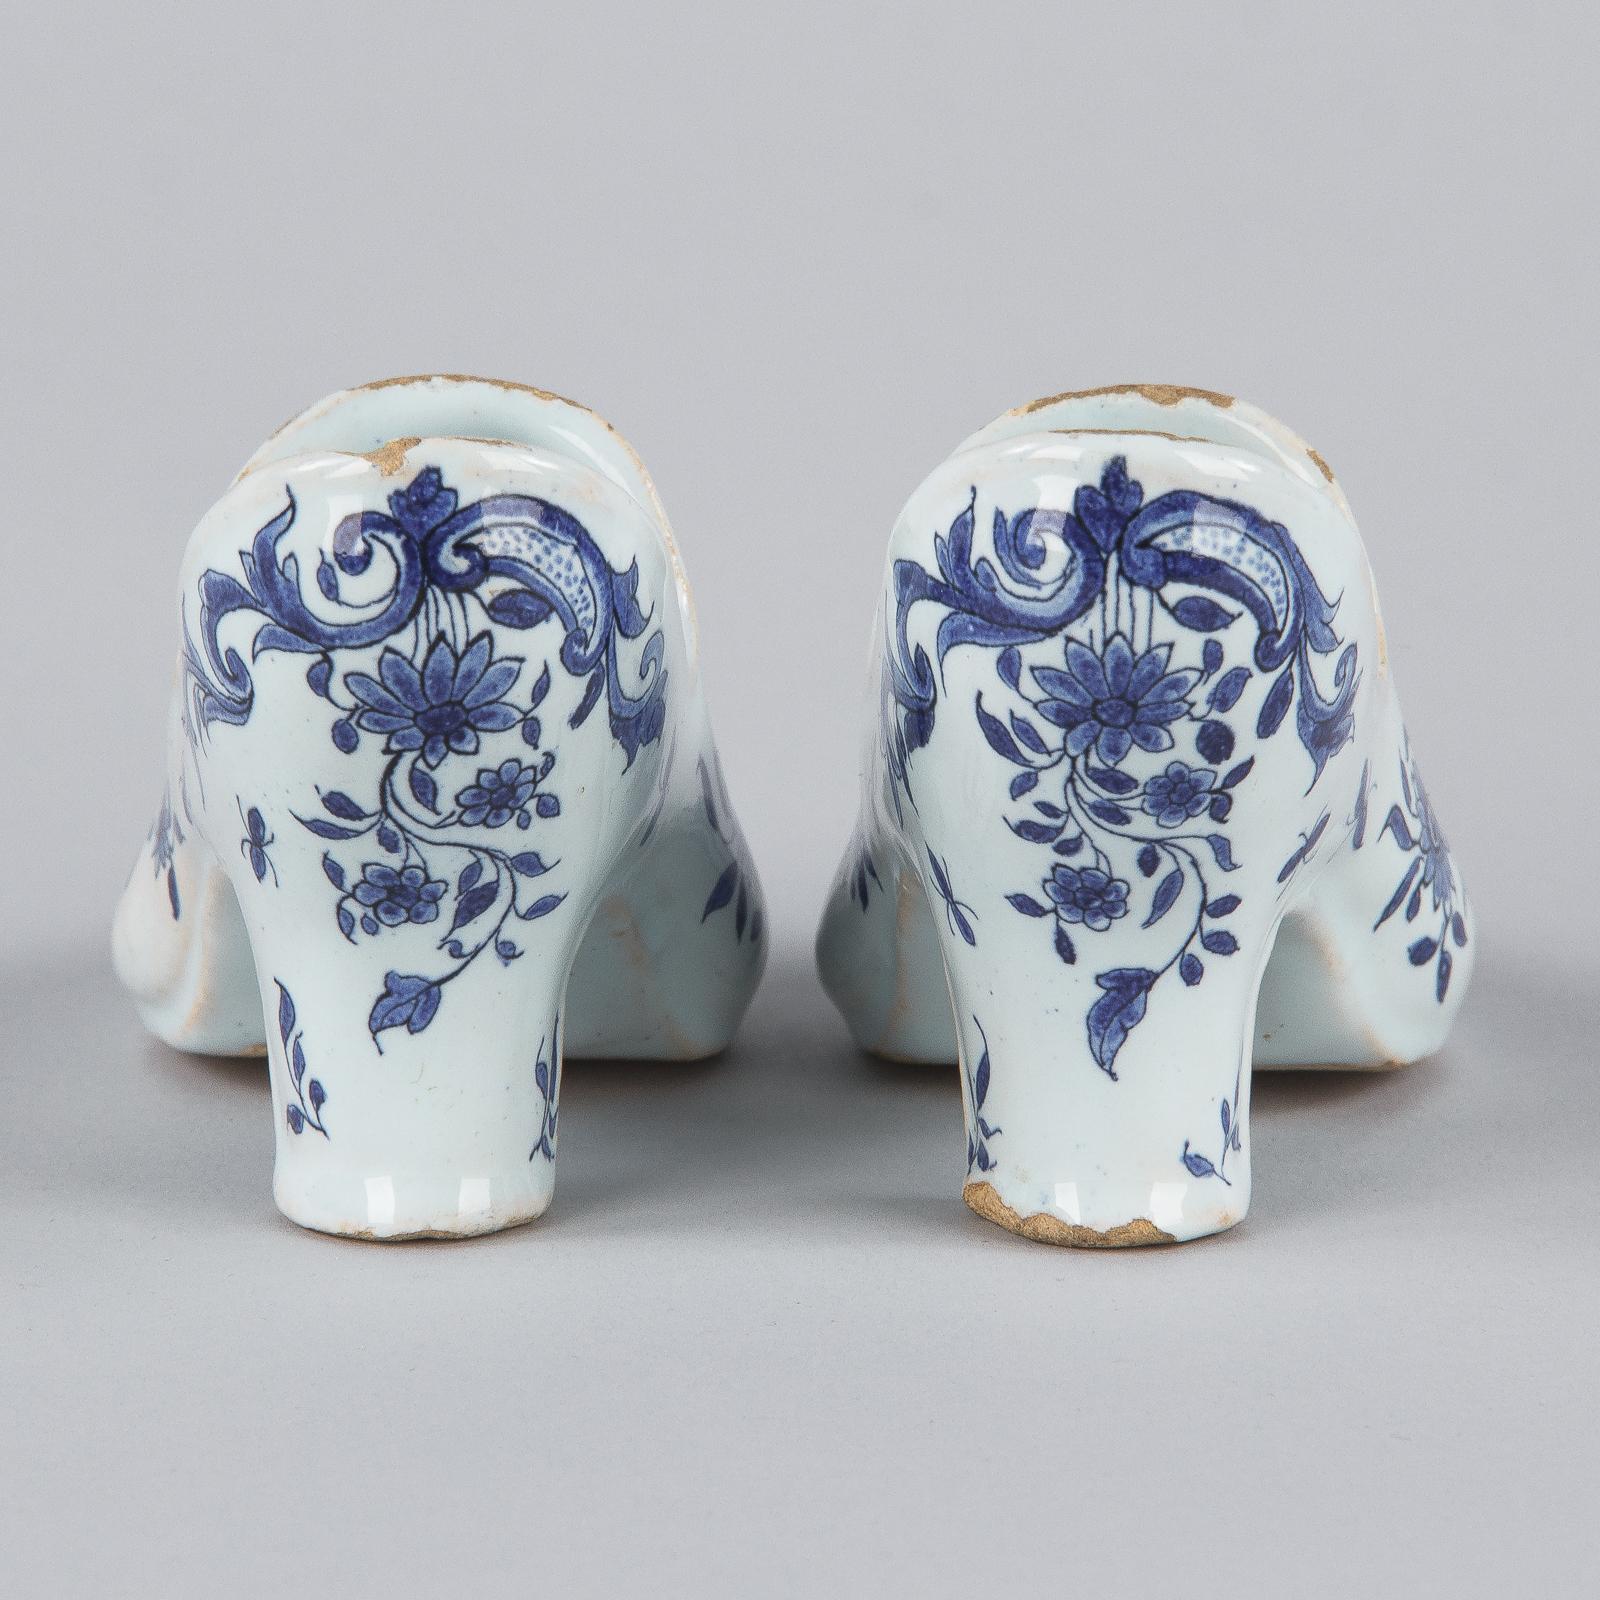 20th Century Miniature Delft Ceramic Shoes, Netherlands, 1940s For Sale